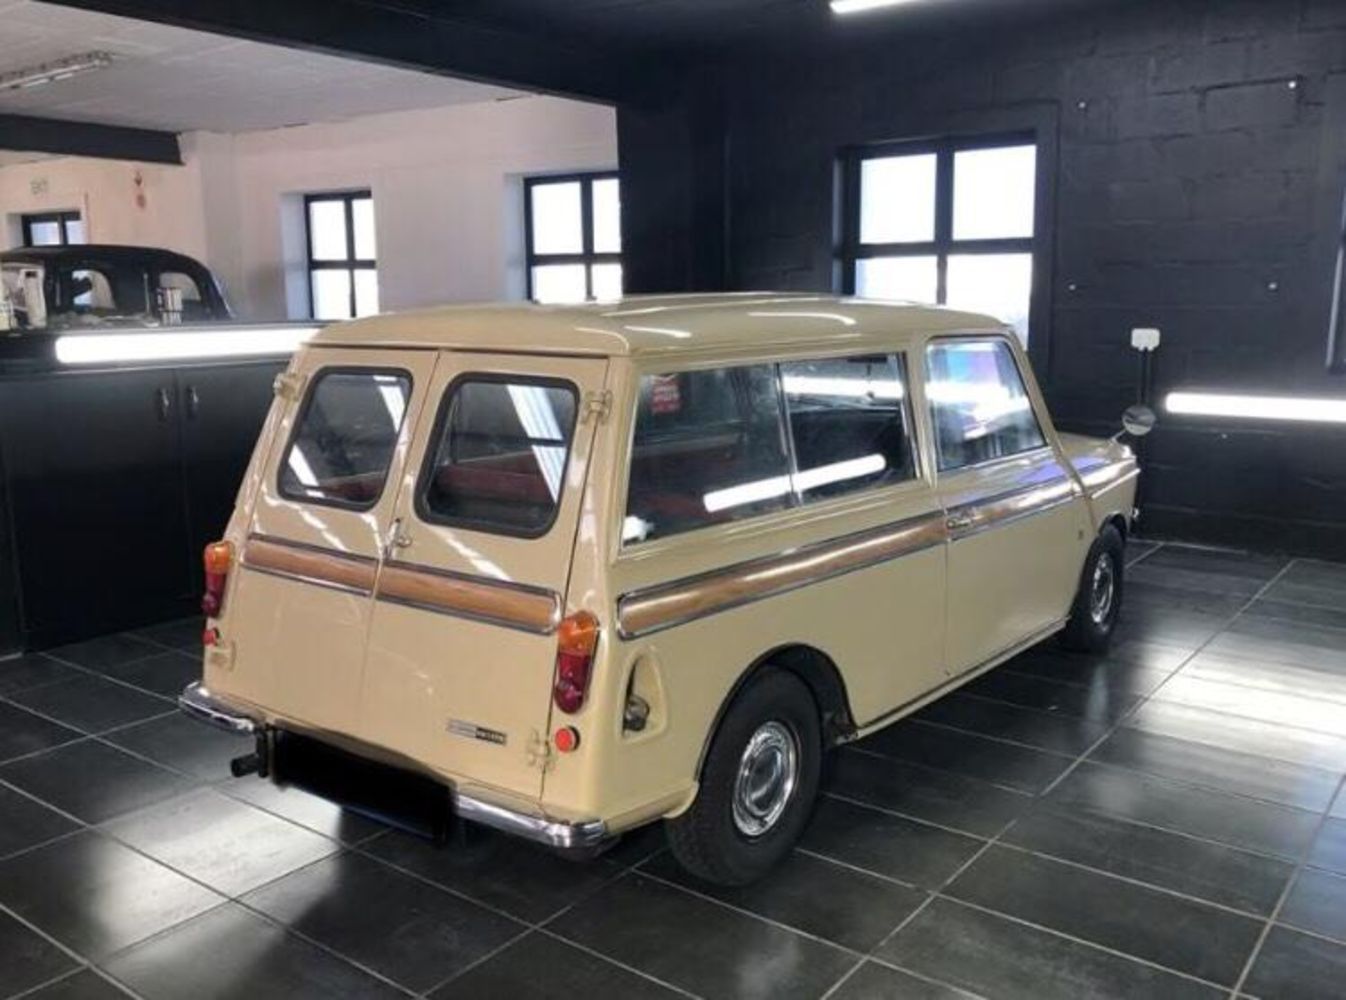 1973 MINI CLUBMAN ESTATE, 39,000 MILES, 2015 BMW 316D AUTO, MASSEY FERGUSON TRACTOR + MUCH MORE ALL Ending Thursday 12th NOVEMBER 2020 From 7pm